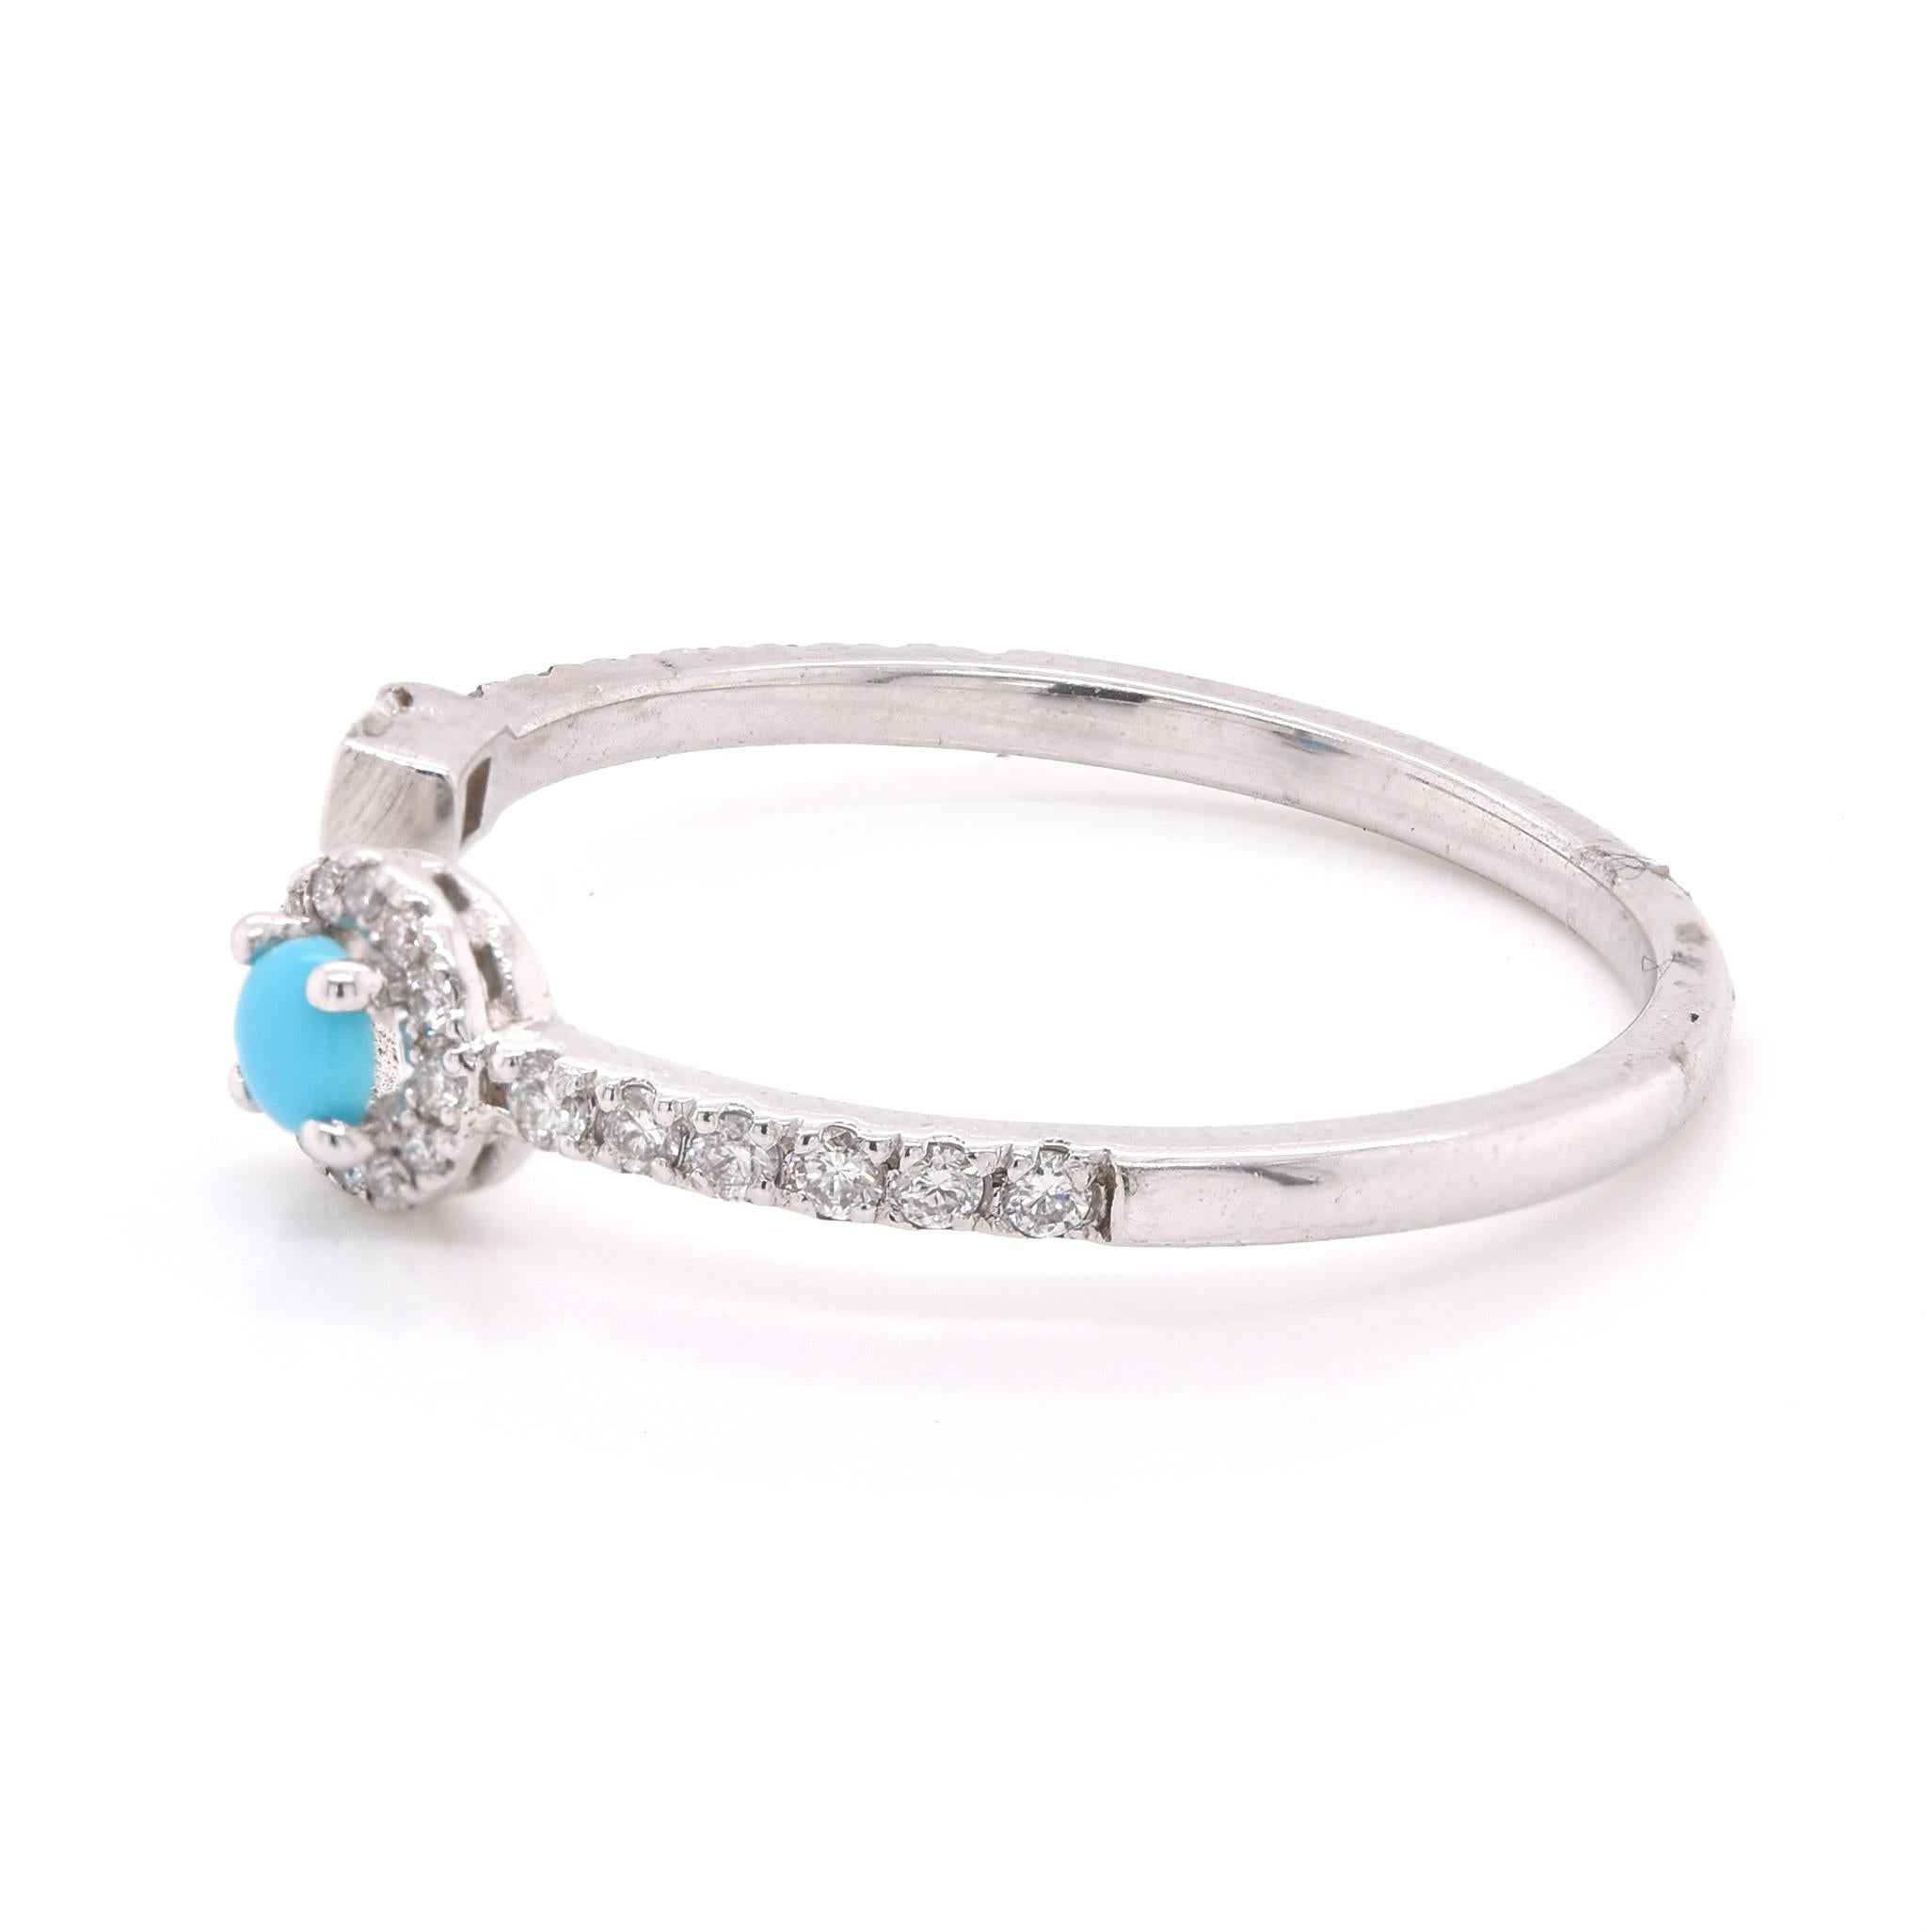 Designer: custom 
Material: 14K white gold
Gemstone: Turquoise round=.07ct
Diamonds: 27 round brilliant cut= .25cttw
Color: G
Clarity: VS
Ring Size: 7
Dimensions: ring is 1.5-2.5mm wide
Weight: 1.37 grams
